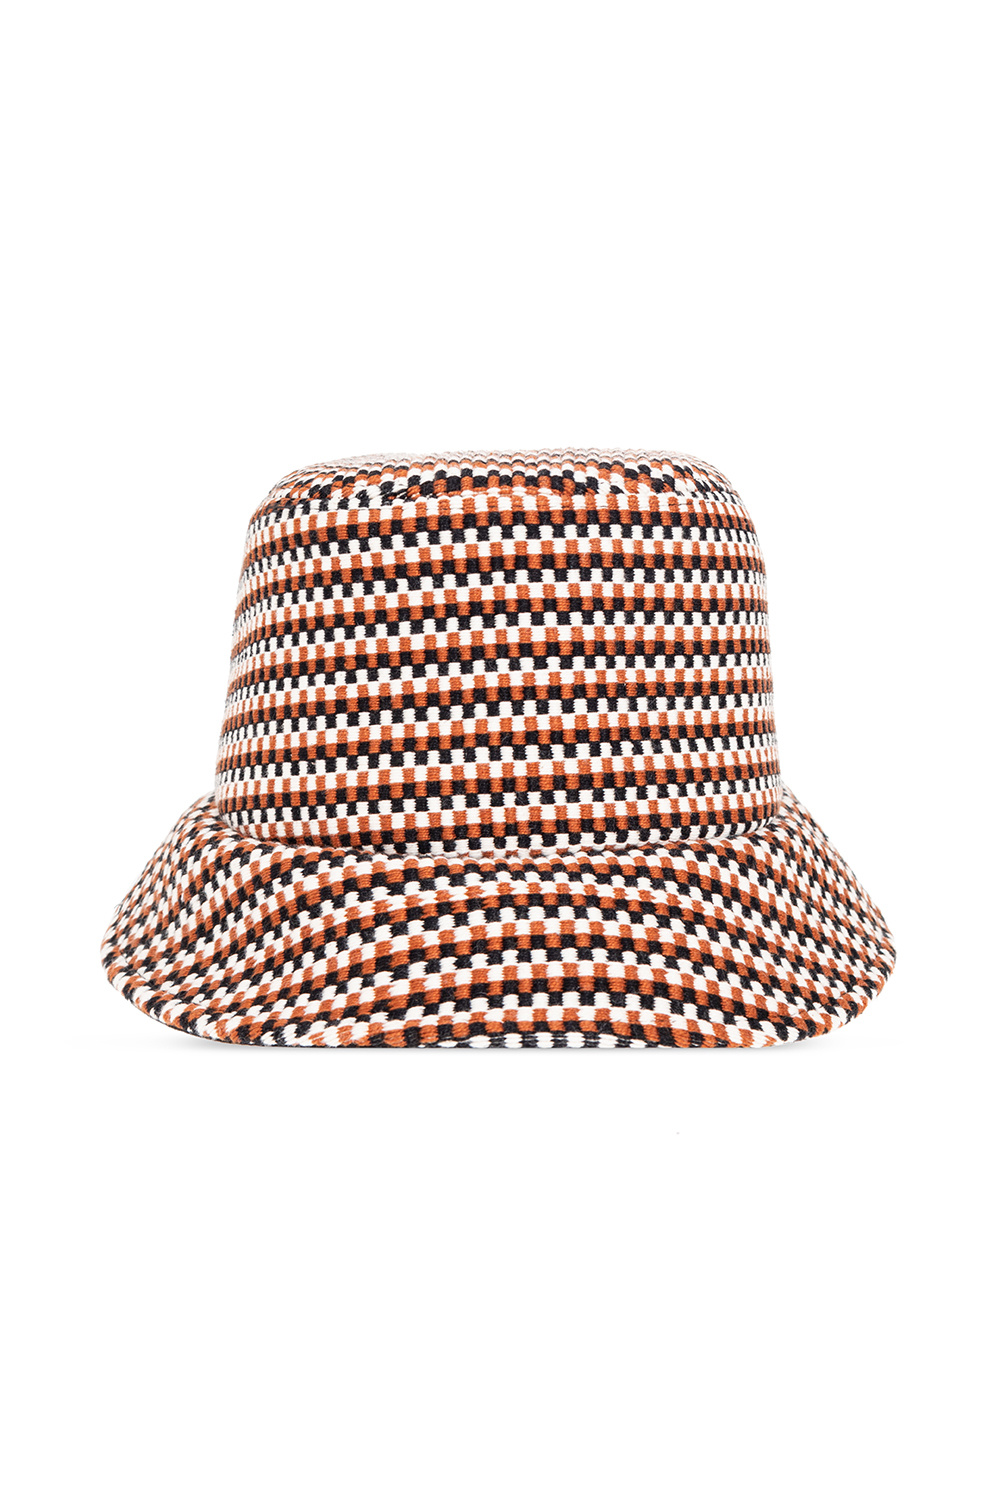 Chloé bronze 56k all over embroidered cap navy